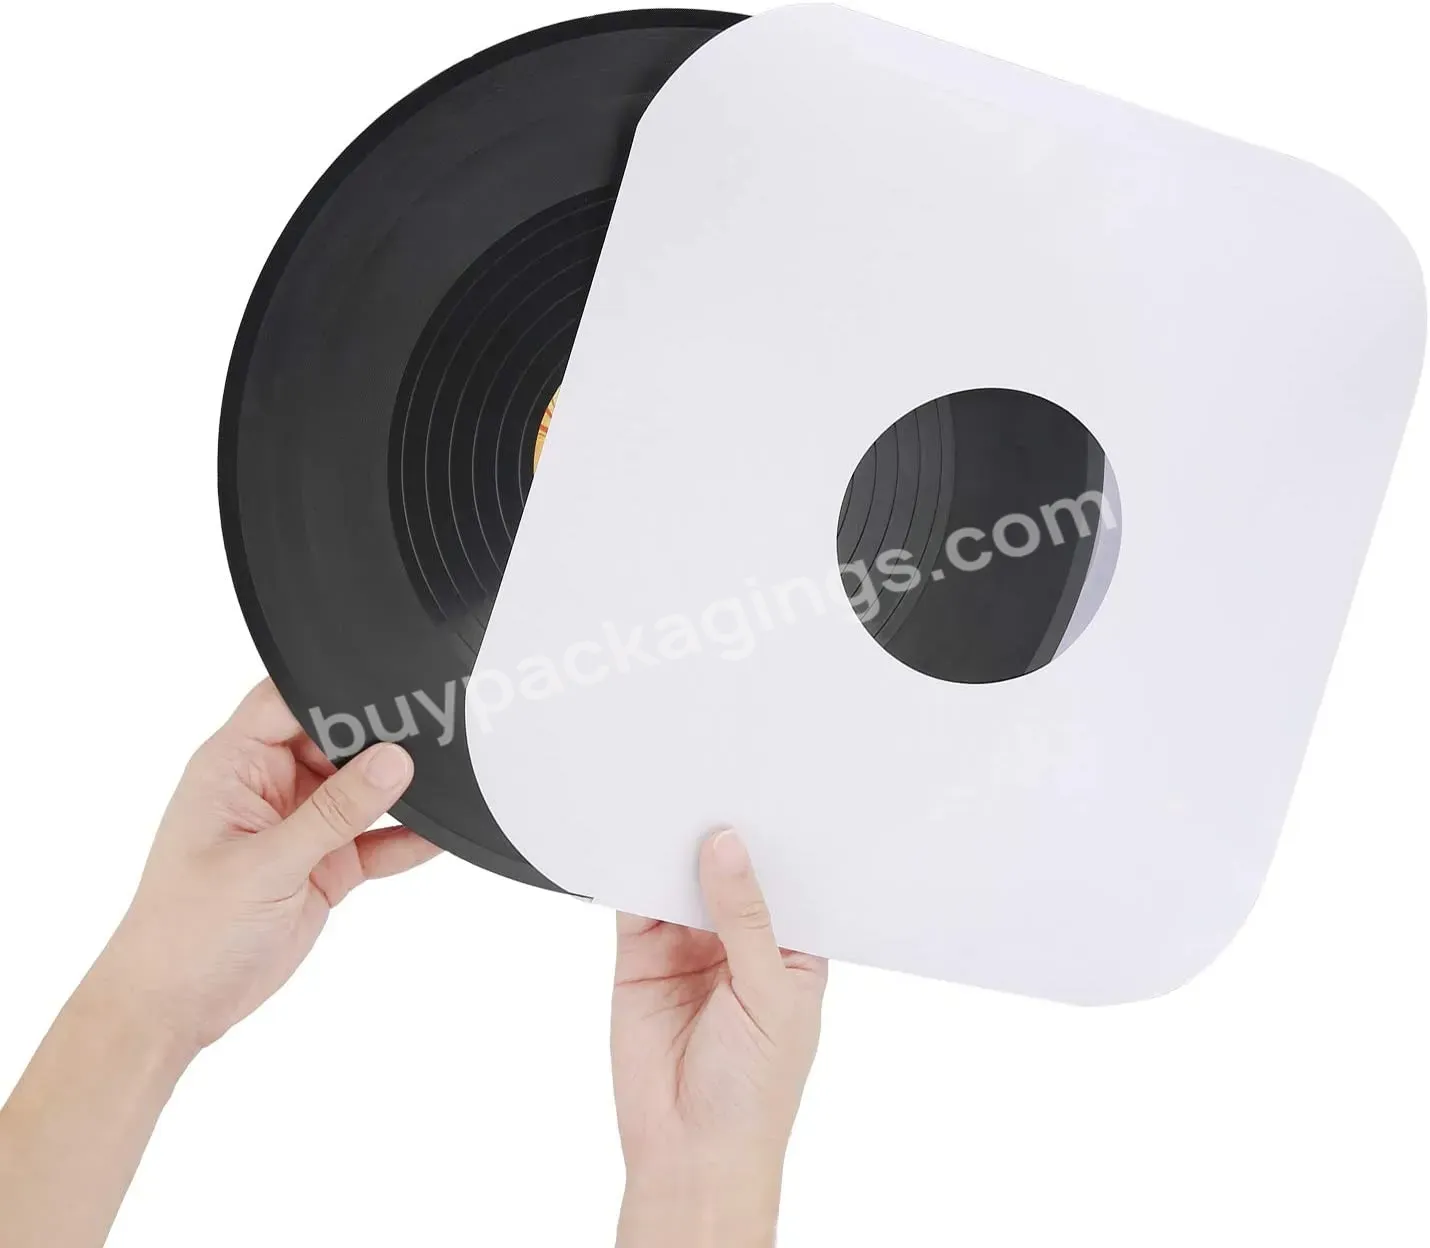 Archival Quality Acid-free Rounded White Paper Record Inner Sleeves For 7" Lp Album - Buy White Paper Record Inner Sleeves,Acid-free Rounded Inner Sleeves For 7" Lp Album,Archival Quality Lp Inner Sleeves.